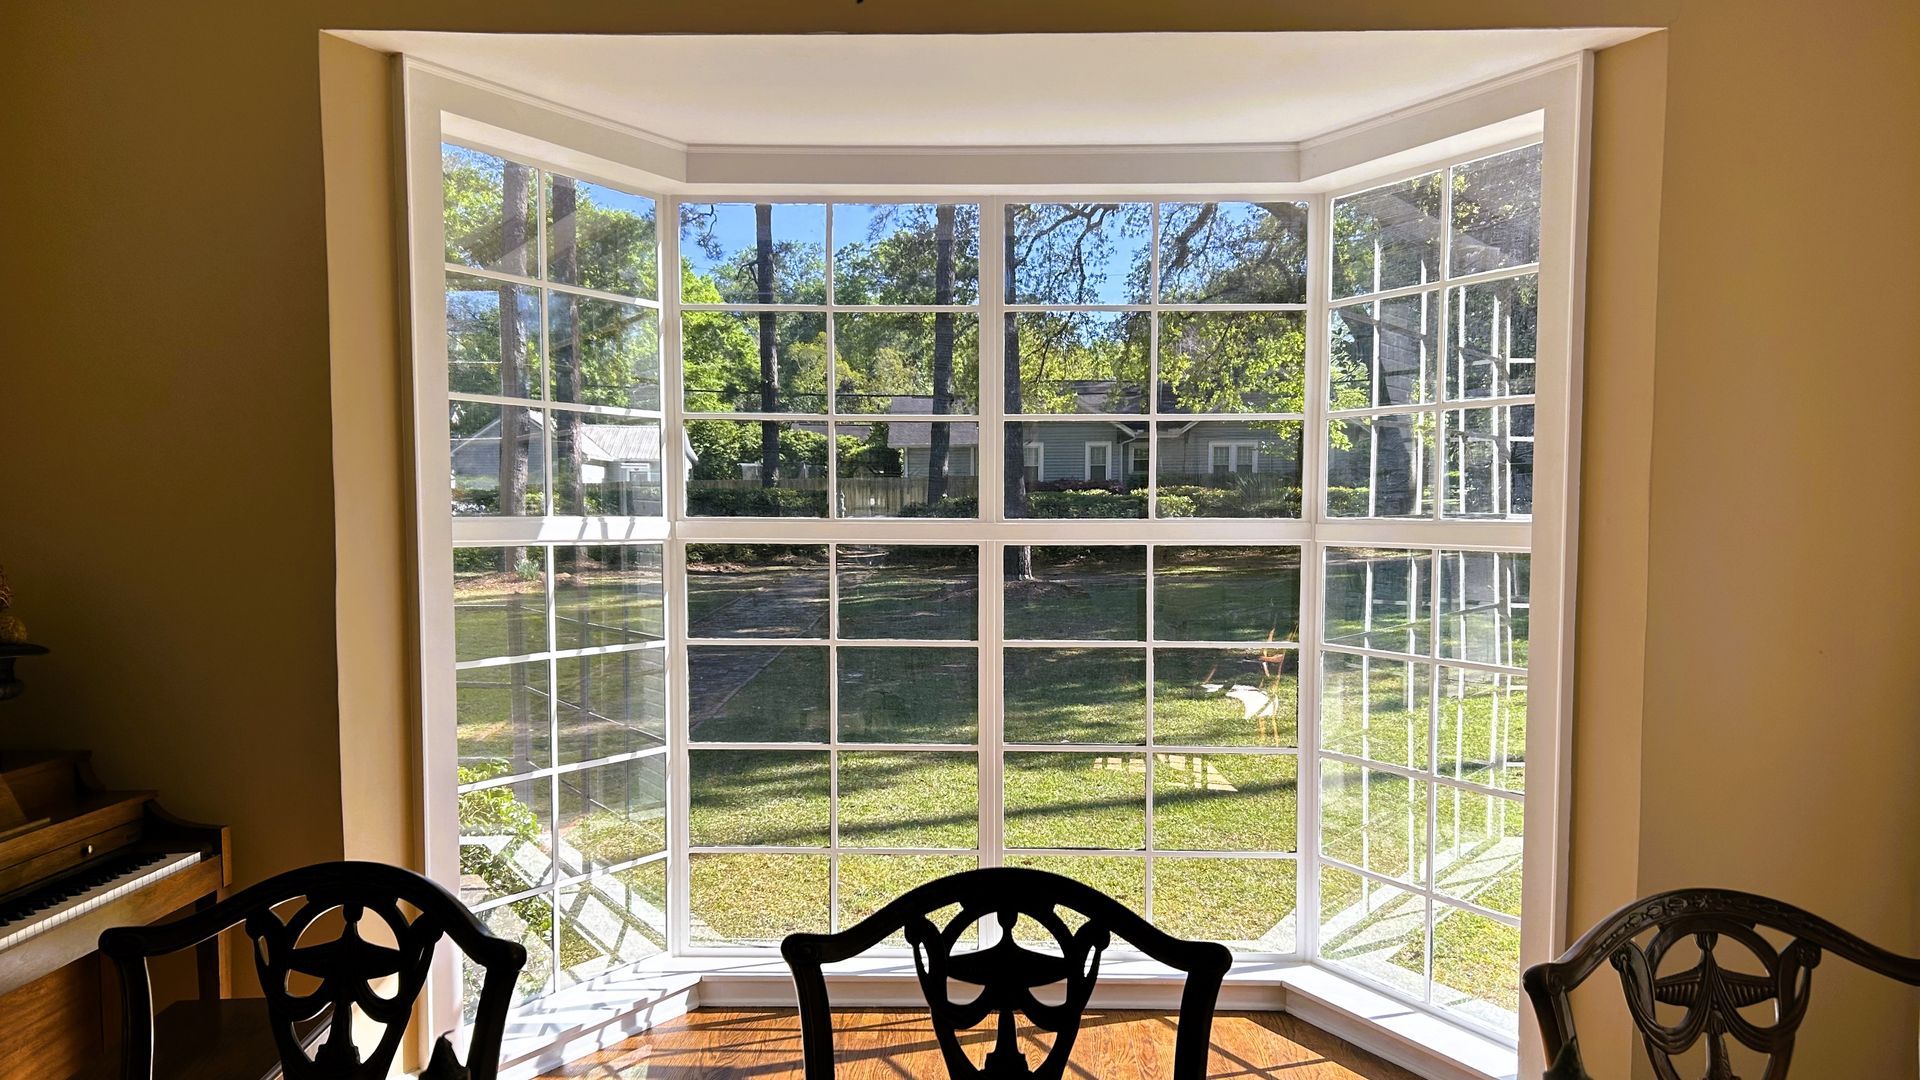 SPF Performance Dim' Crystal residential window tint optimizes the open view stopping bright UV-Sun fade and heat gain from entering the home.